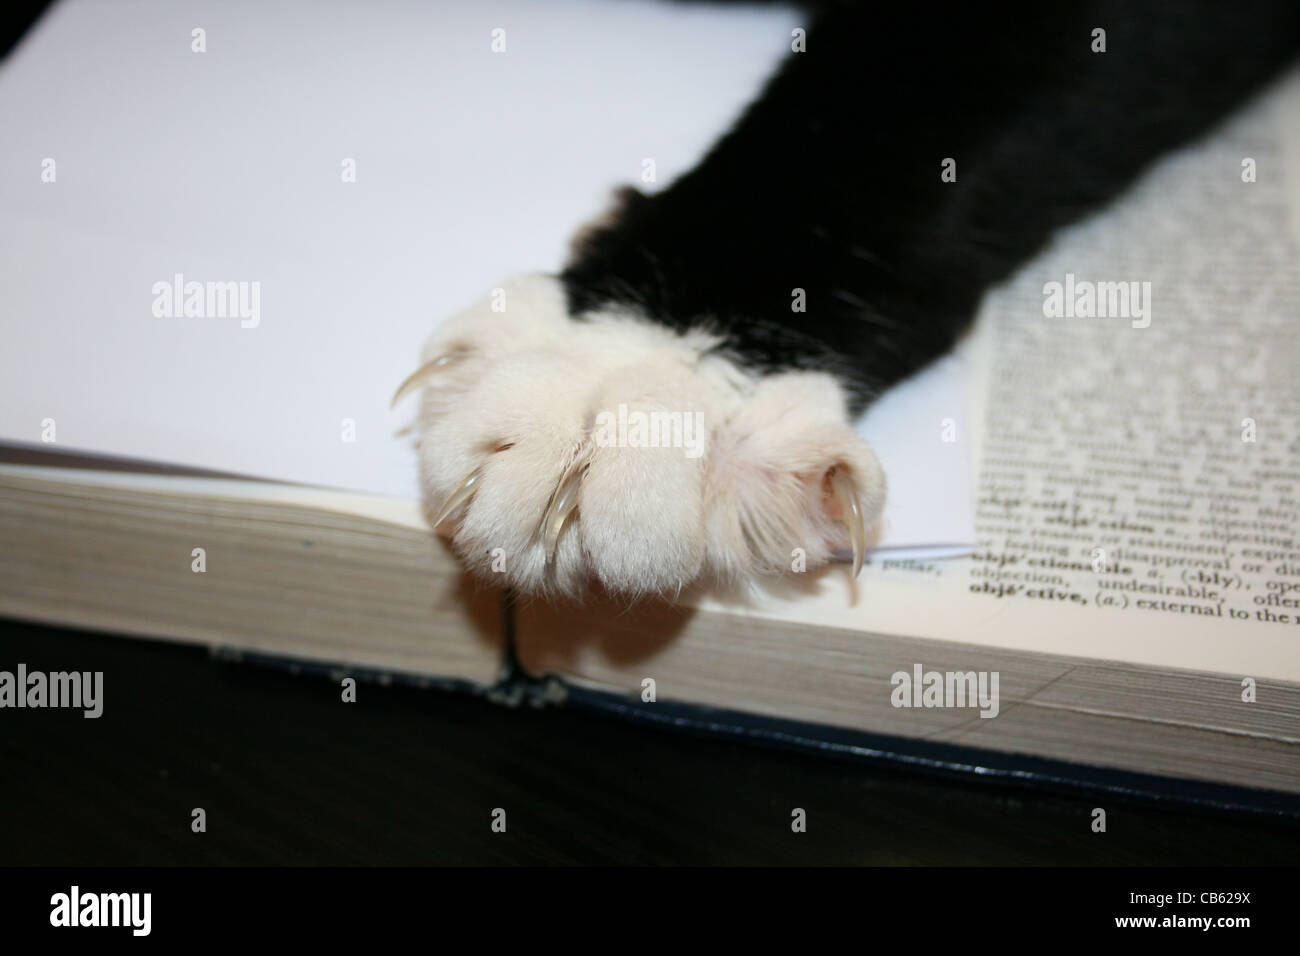 Black and white leg of cat with big feet and claws. Stock Photo